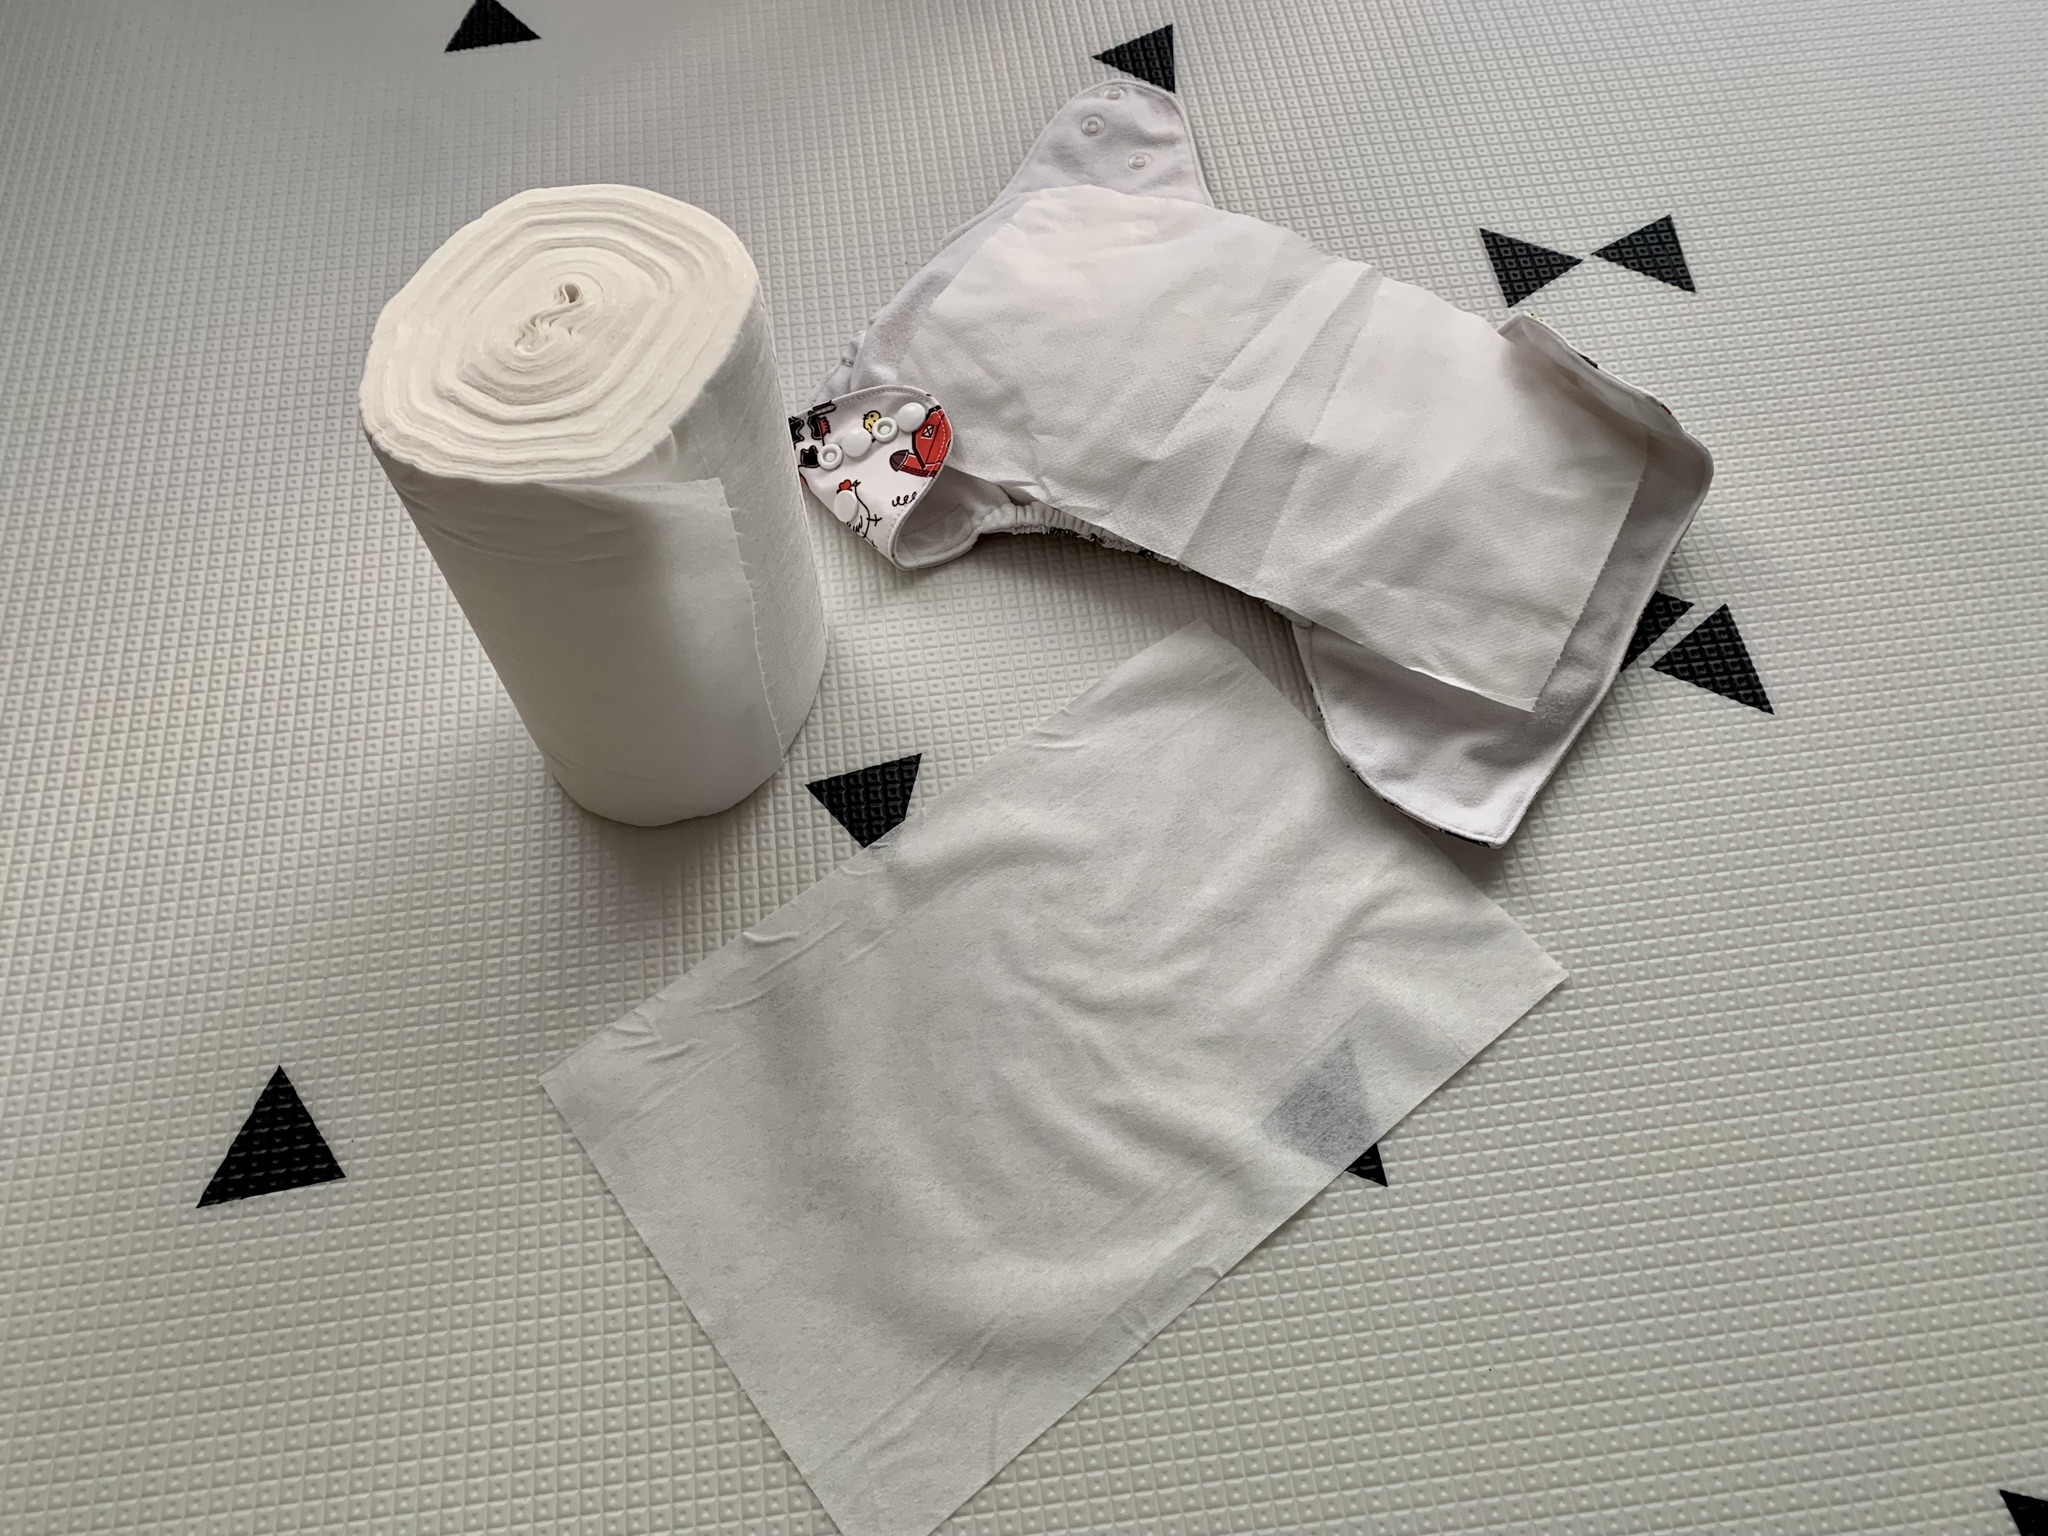 Diaper liner roll with liner on diaper